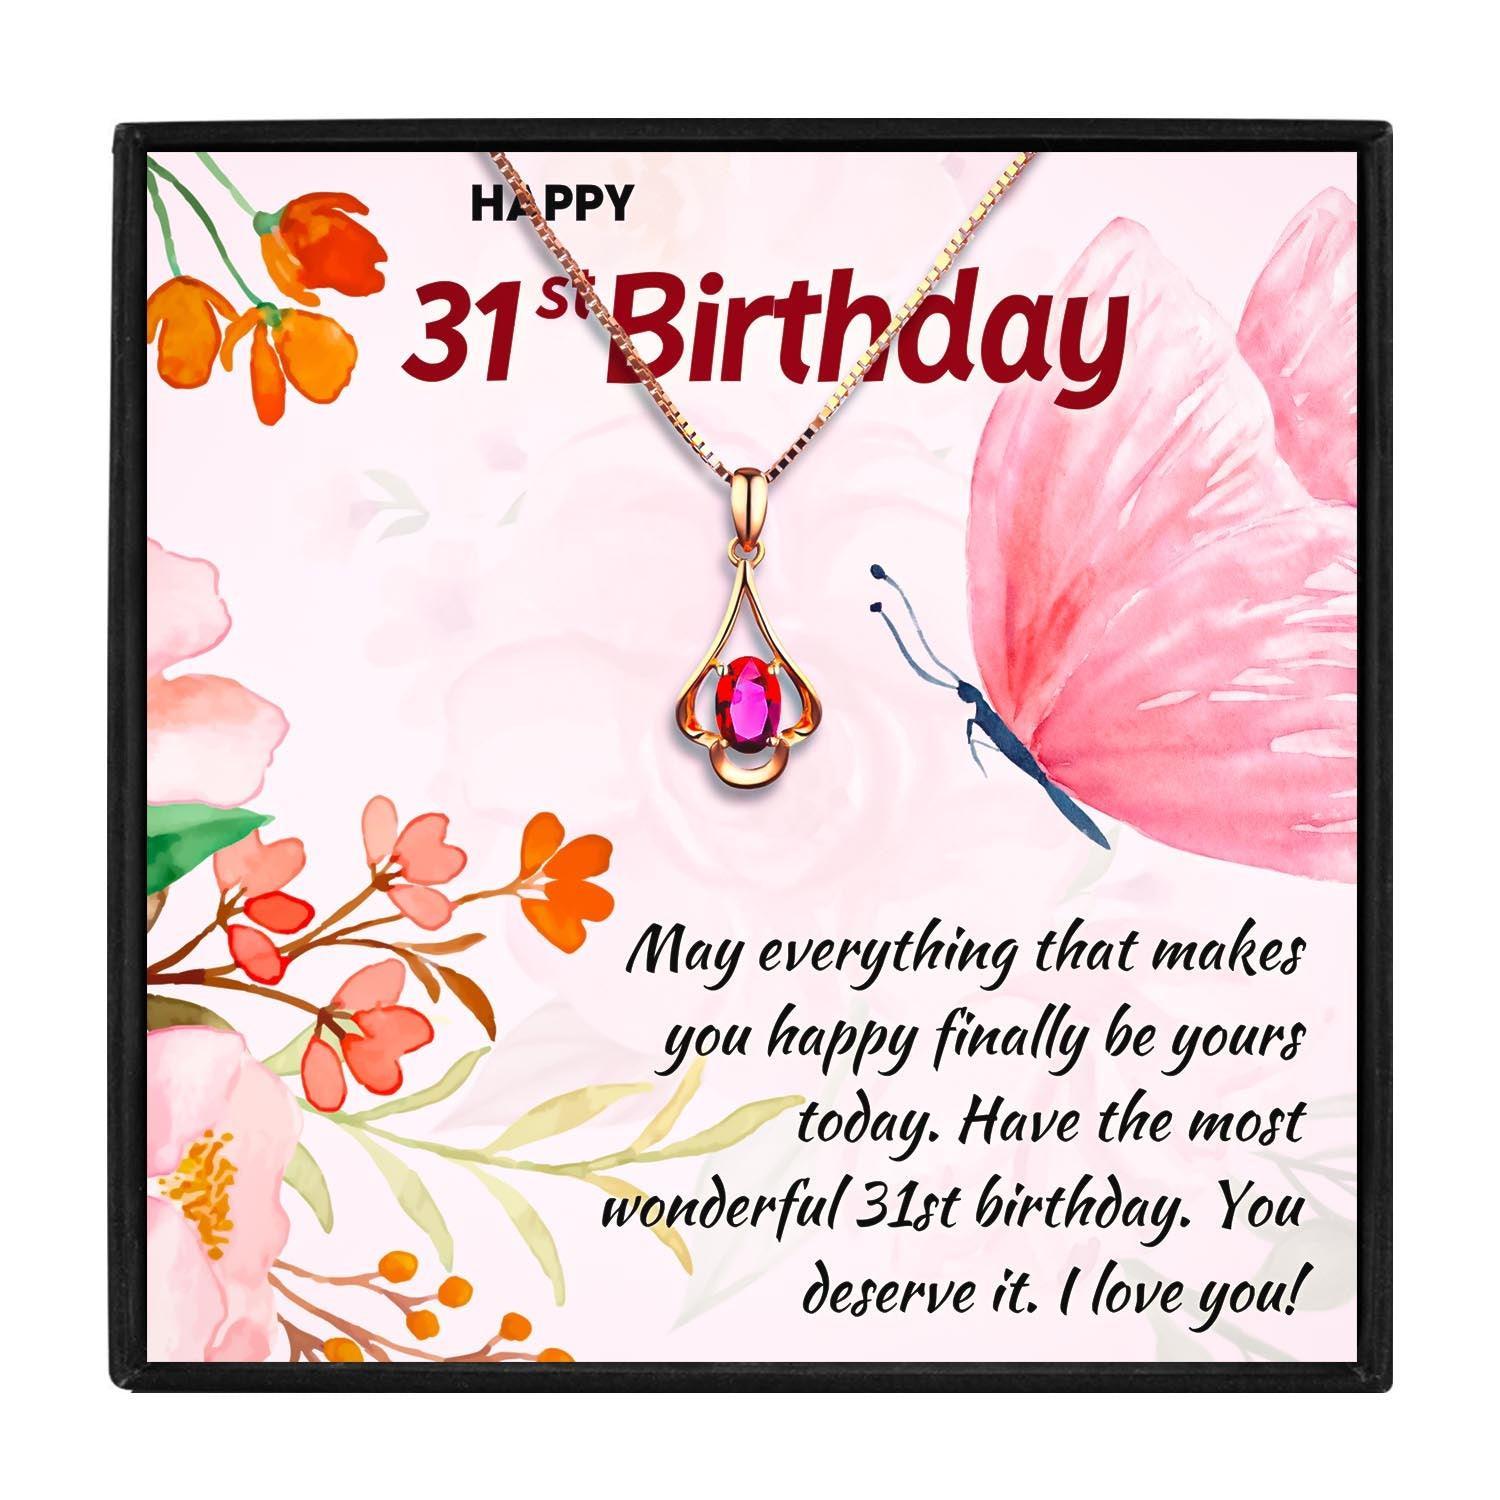 31st Birthday Gifts for 31 Year Old Women for Christmas 2023 | 31st Birthday Gifts for 31 Year Old Women - undefined | 31 birthday gift, 31 gifts for 31st birthday, 31st birthday ideas for her, 31st birthday ideas for wife | From Hunny Life | hunnylife.com